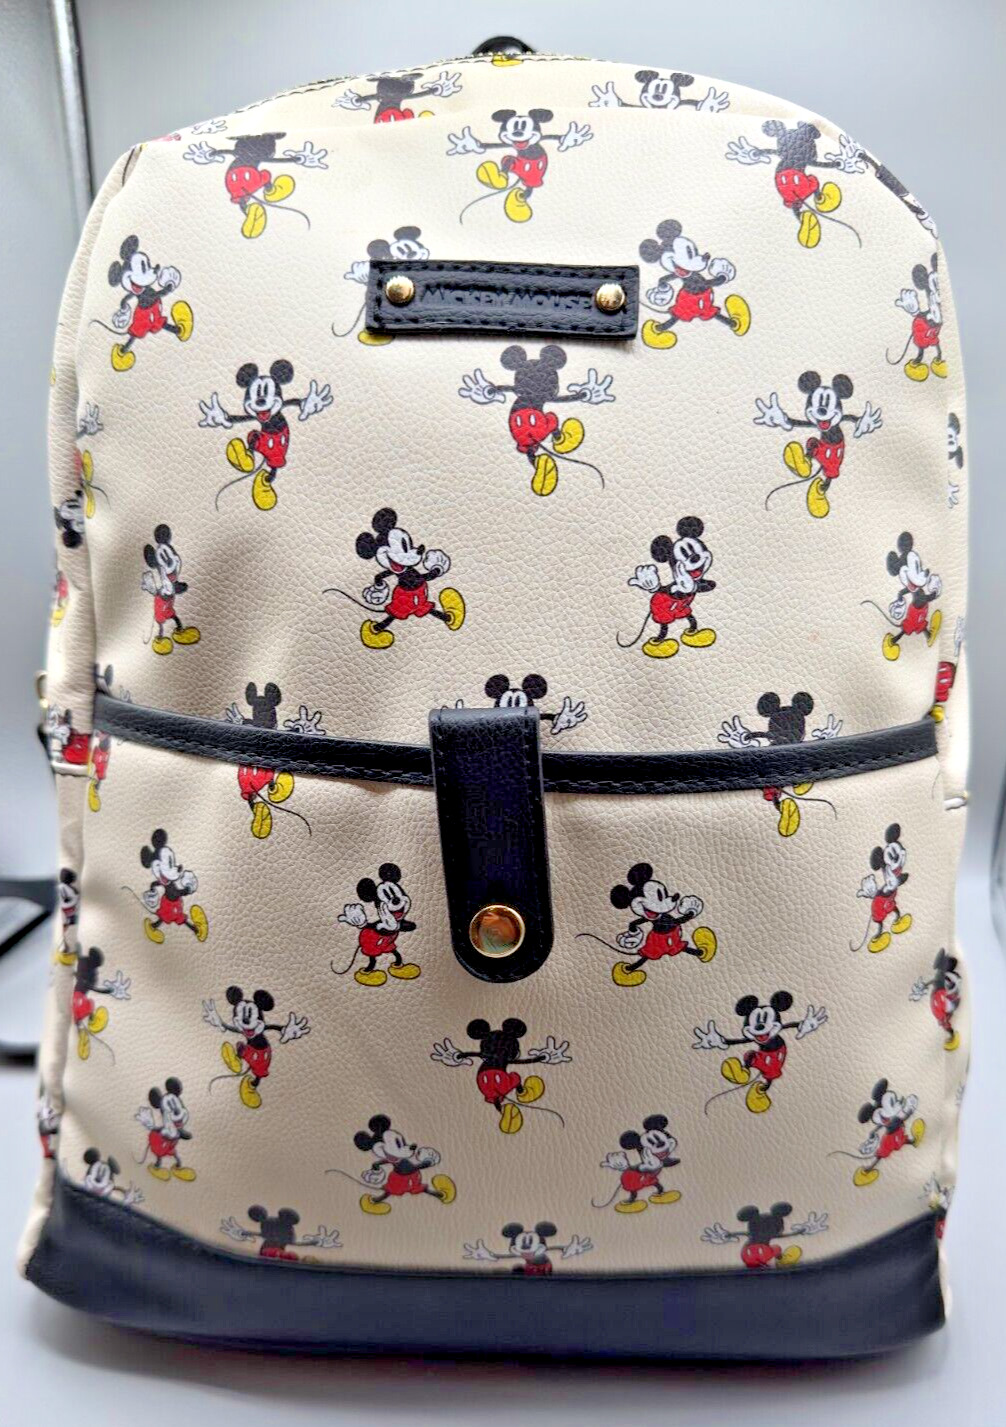 Disney Mickey Mouse Classic Allover Print 14 inch Medium Backpack